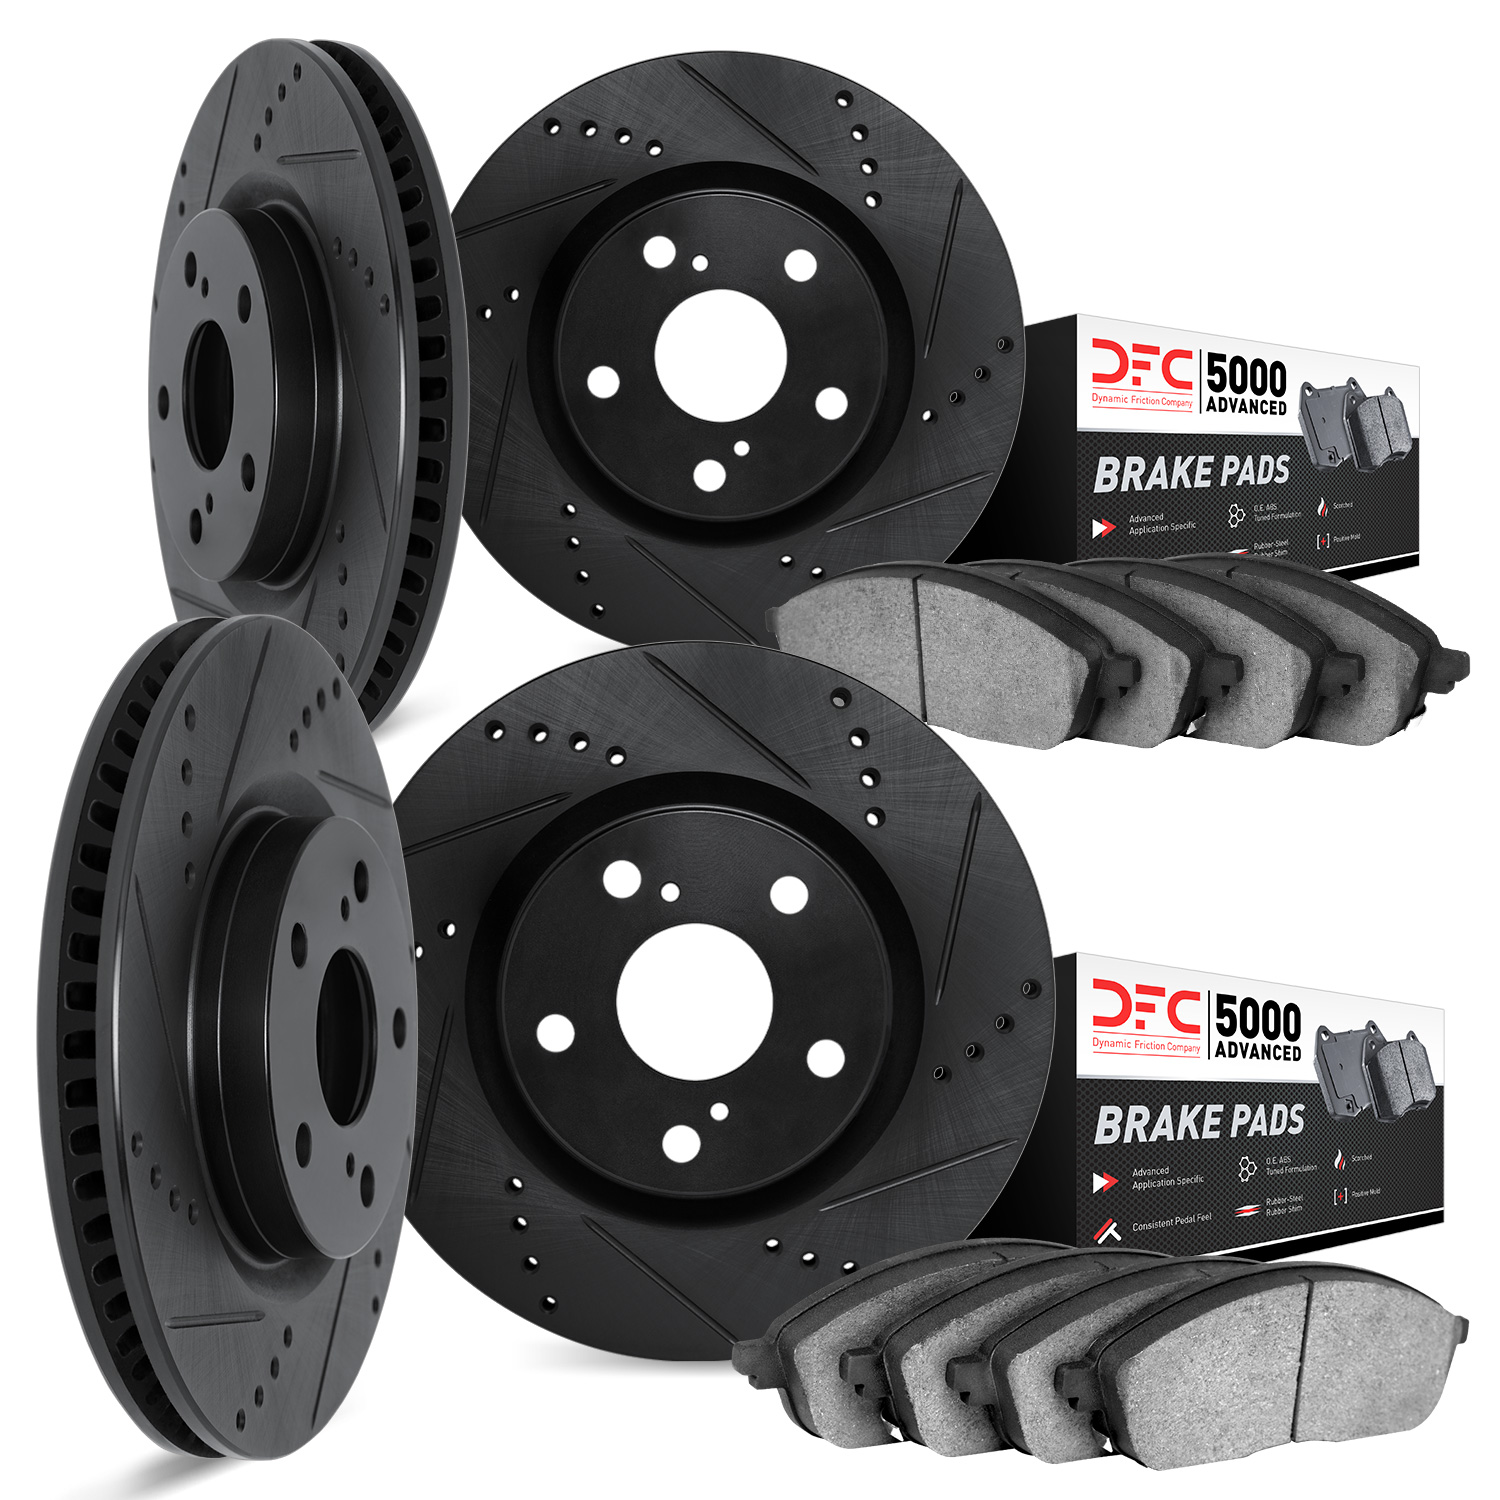 8504-76120 Drilled/Slotted Brake Rotors w/5000 Advanced Brake Pads Kit [Black], 1986-1992 Lexus/Toyota/Scion, Position: Front an